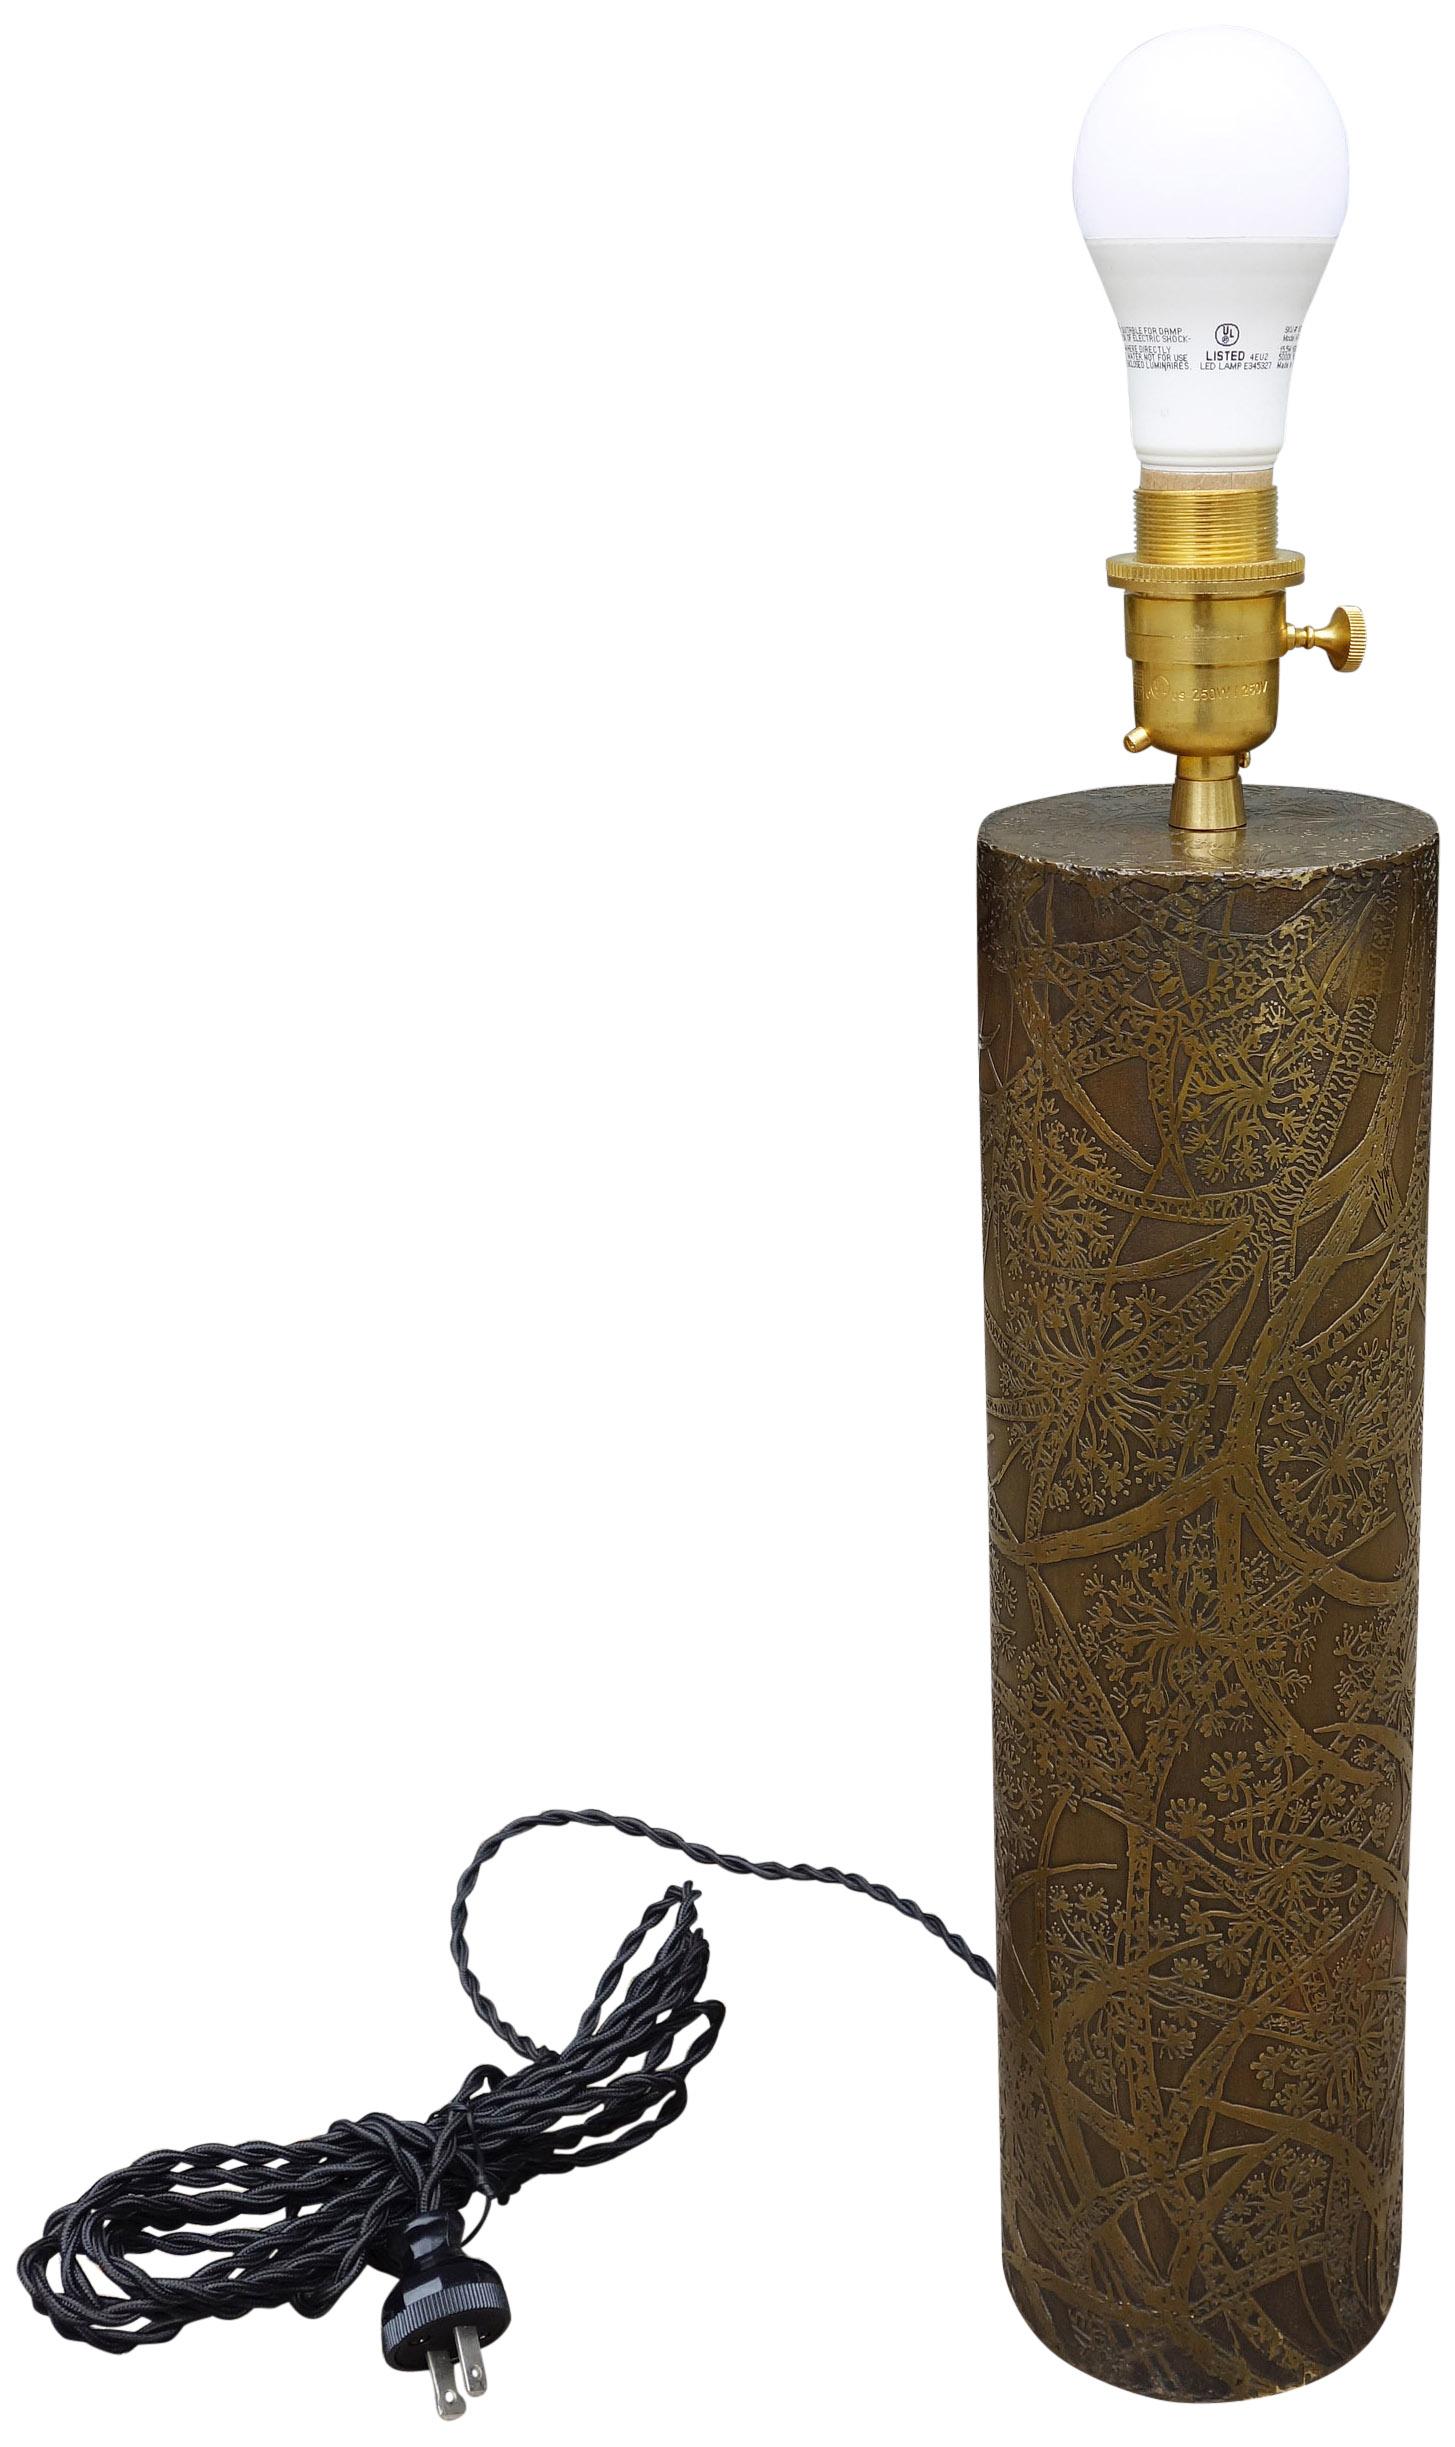 For your consideration is this stunning brass table lamp. Made of solid brass with an amazing floral motif resembling Queen Anne's lace.  Designed by Yupadee 

Cylinder lamp is 16